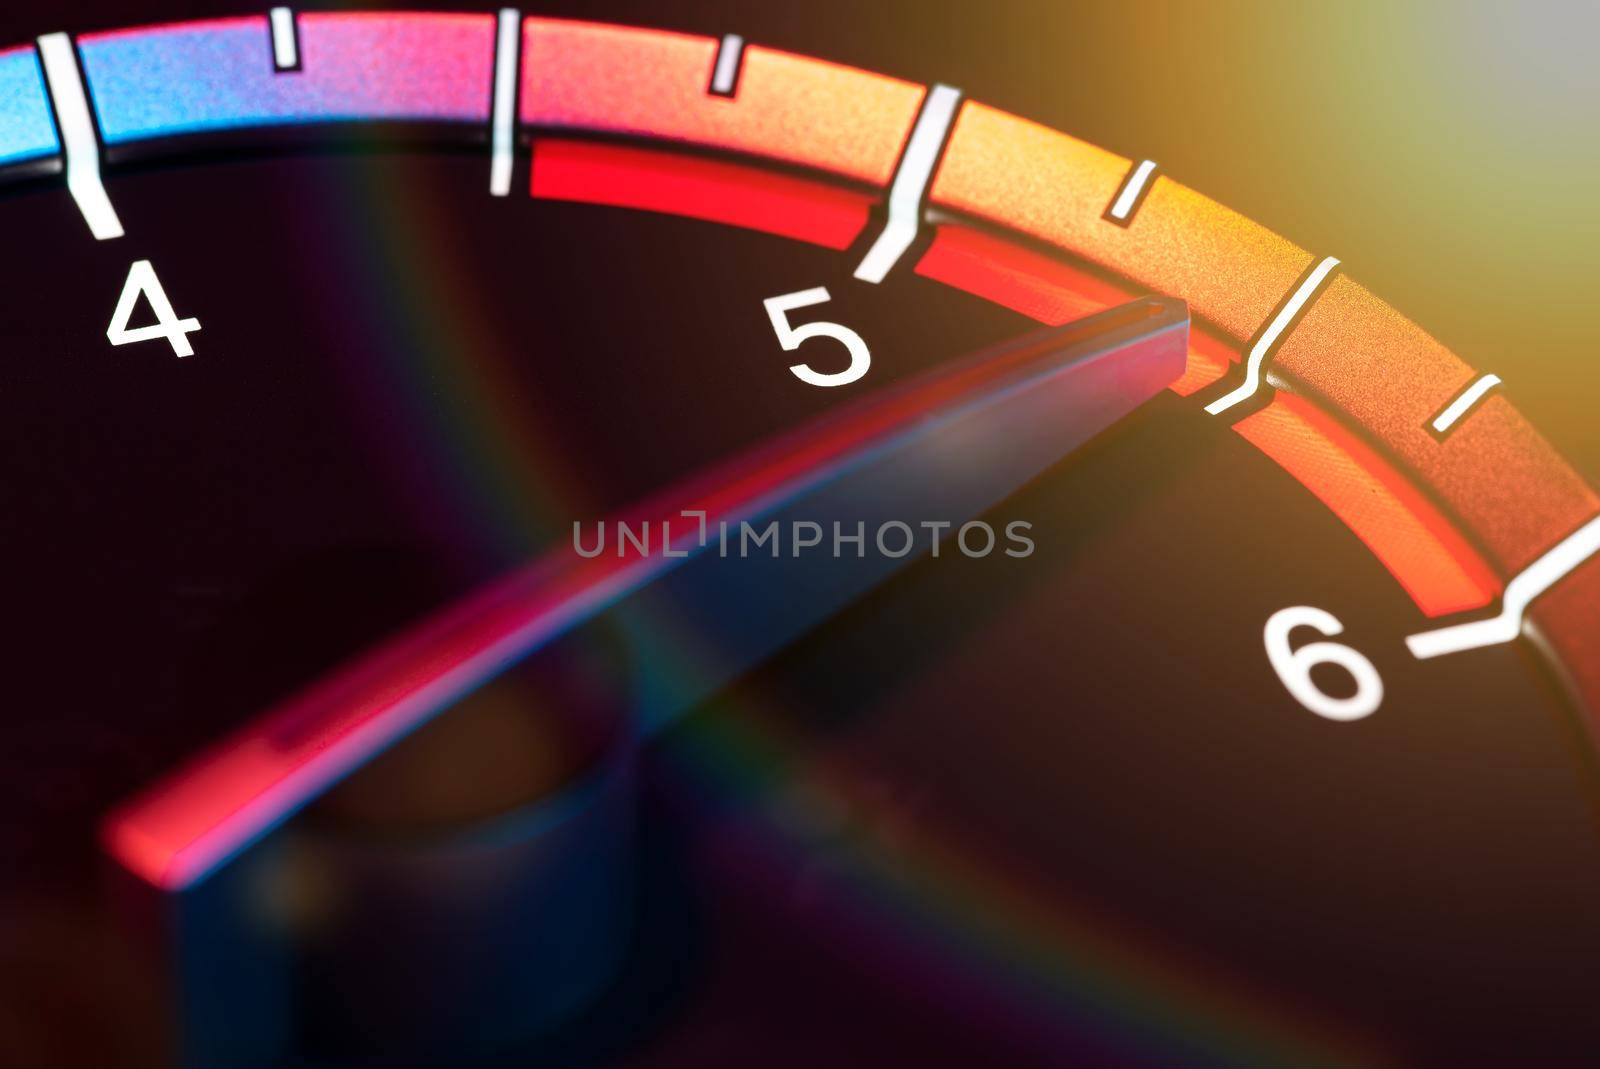 Rpm car odometer detail 5 by pippocarlot